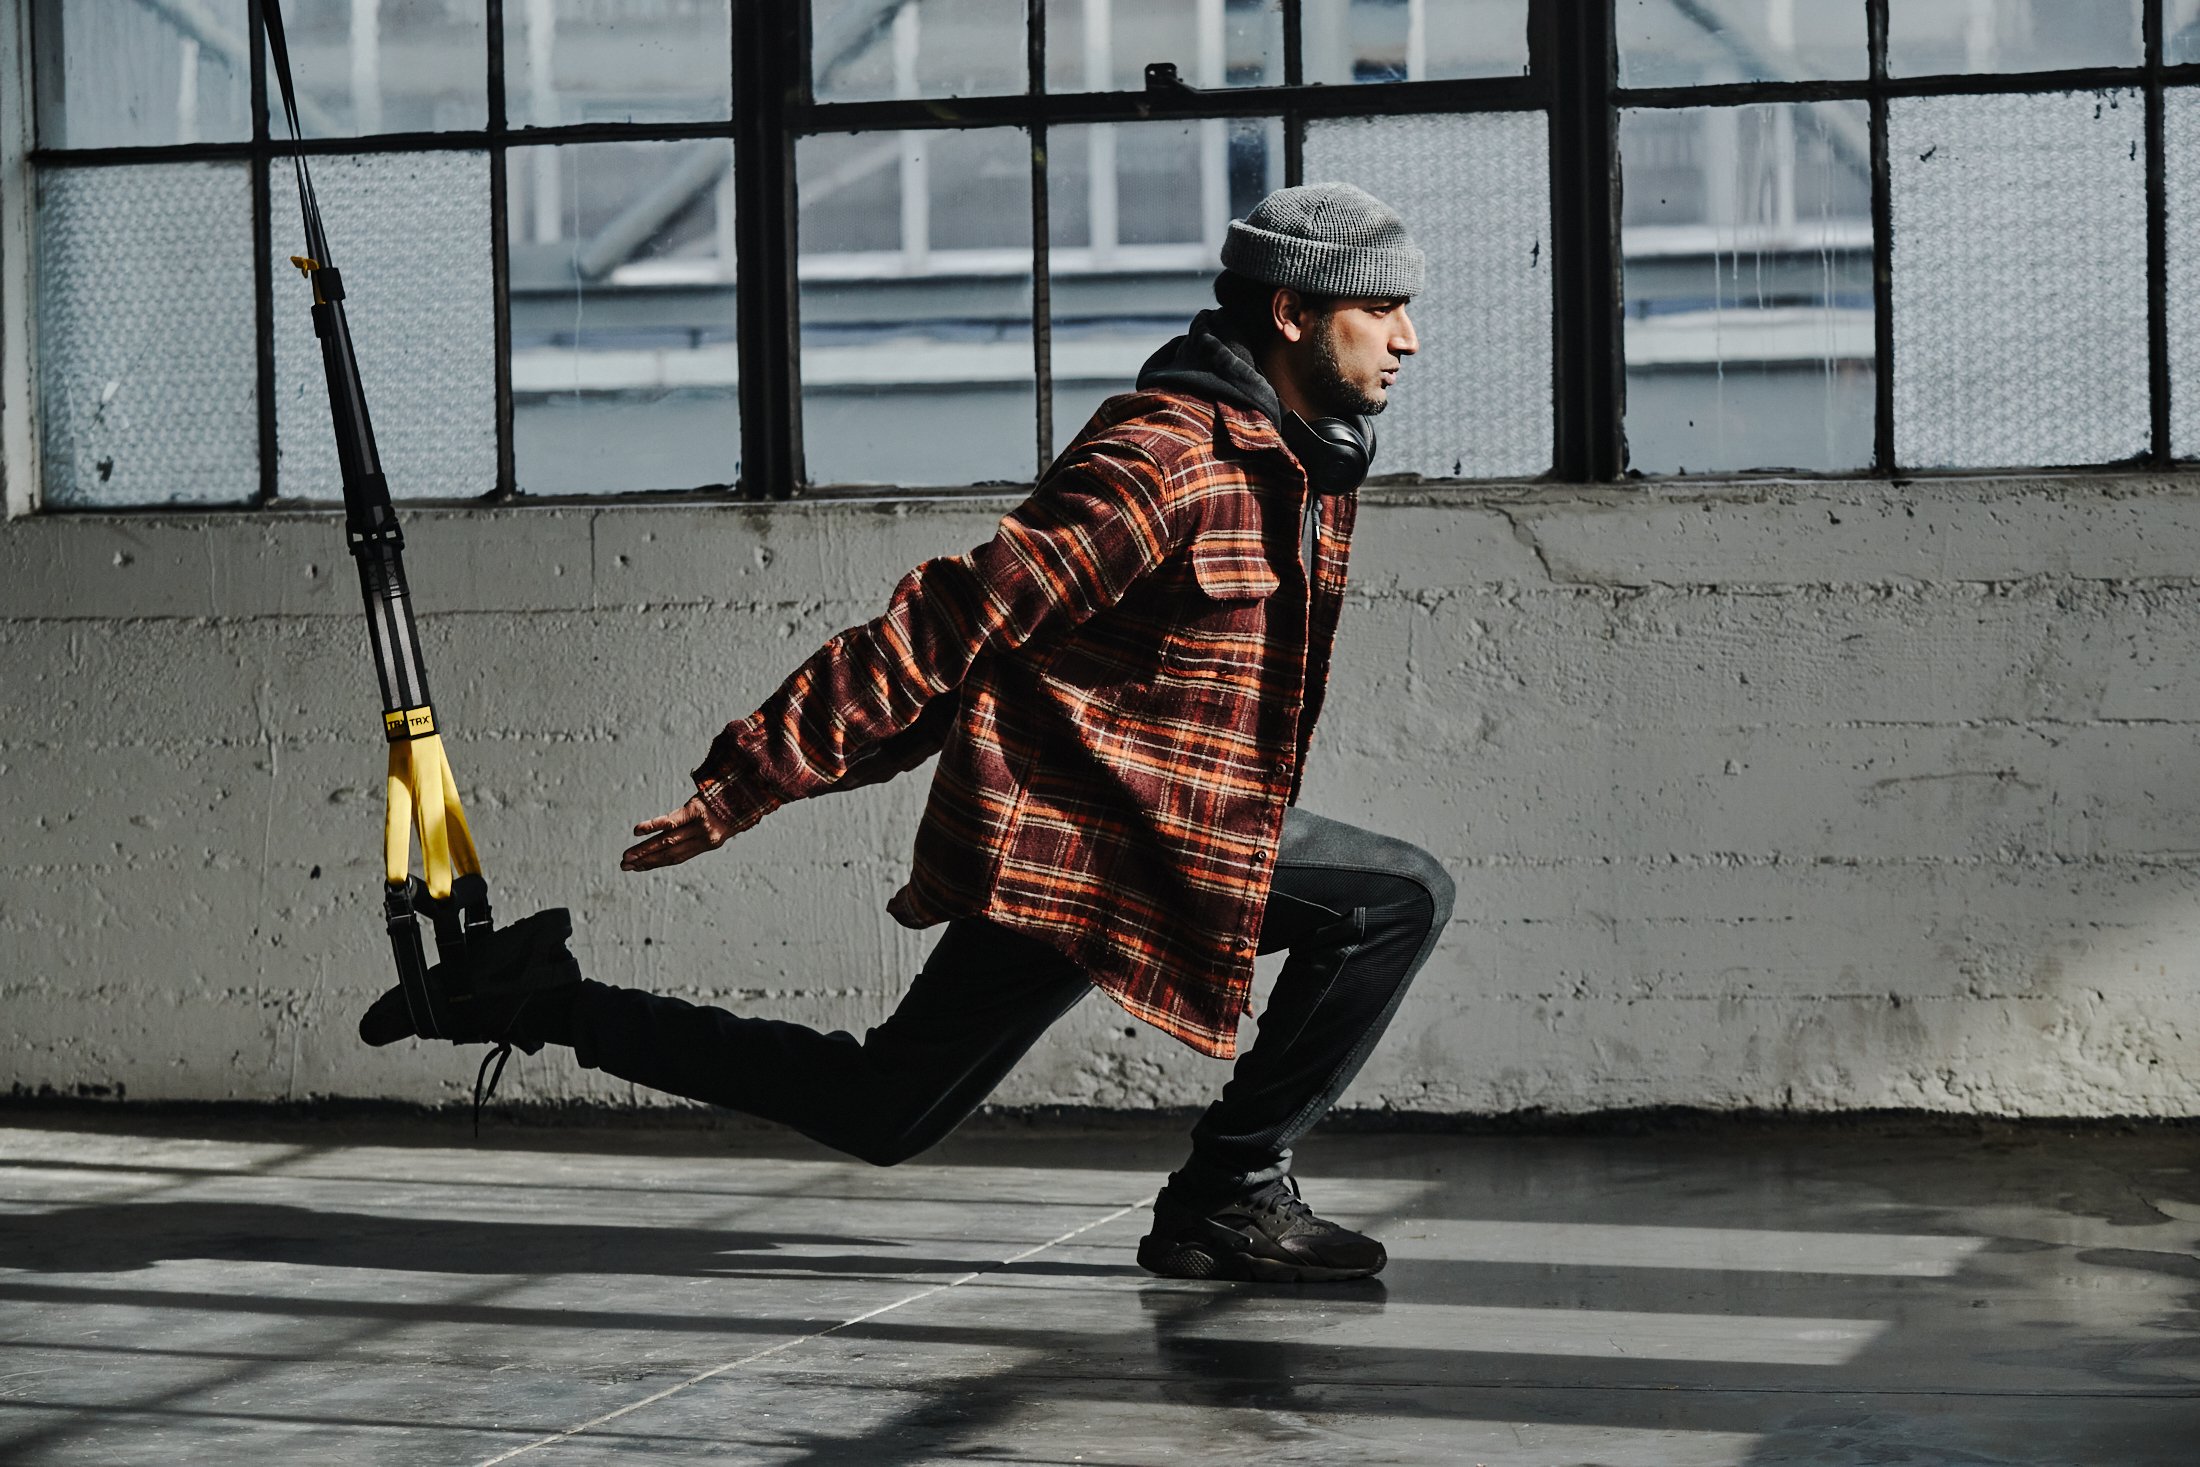 TJ Yale, wearing a beanie, red flannel shirt, and black pants and sneakers, performs a TRX Lunge.